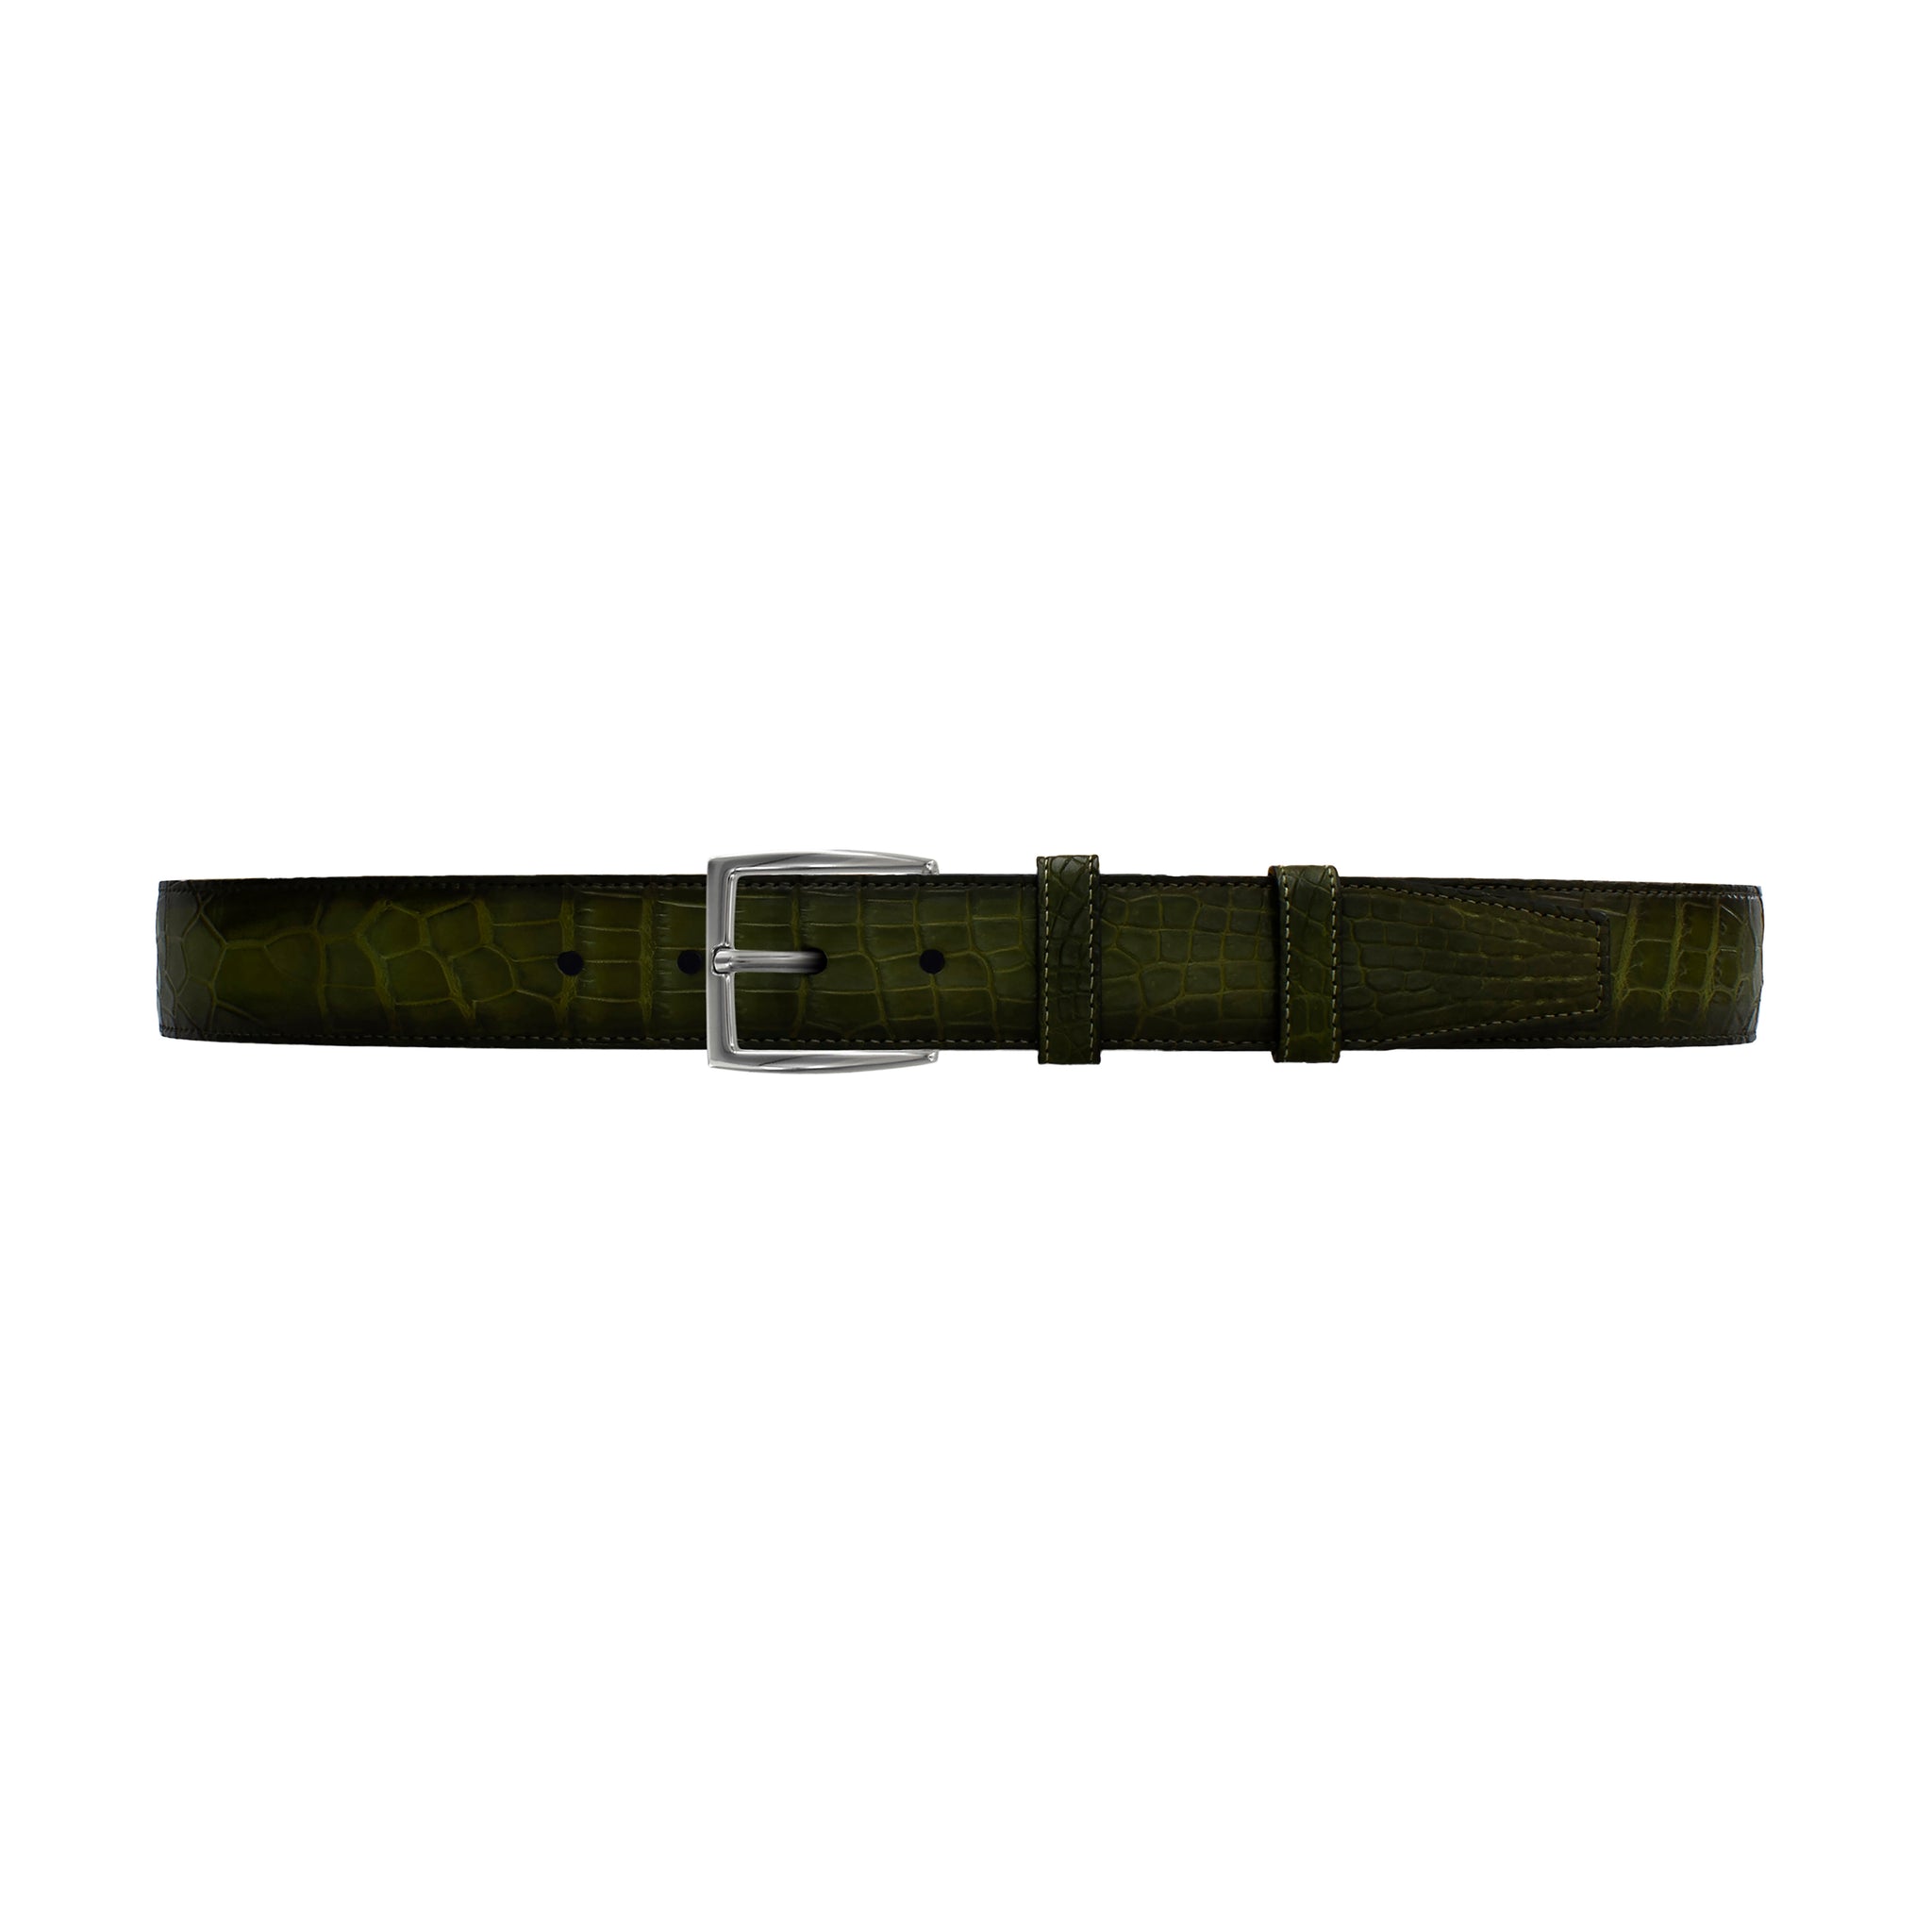 1 1/2" Olive Patina Belt with Winston Dress Buckle in Polished Nickel